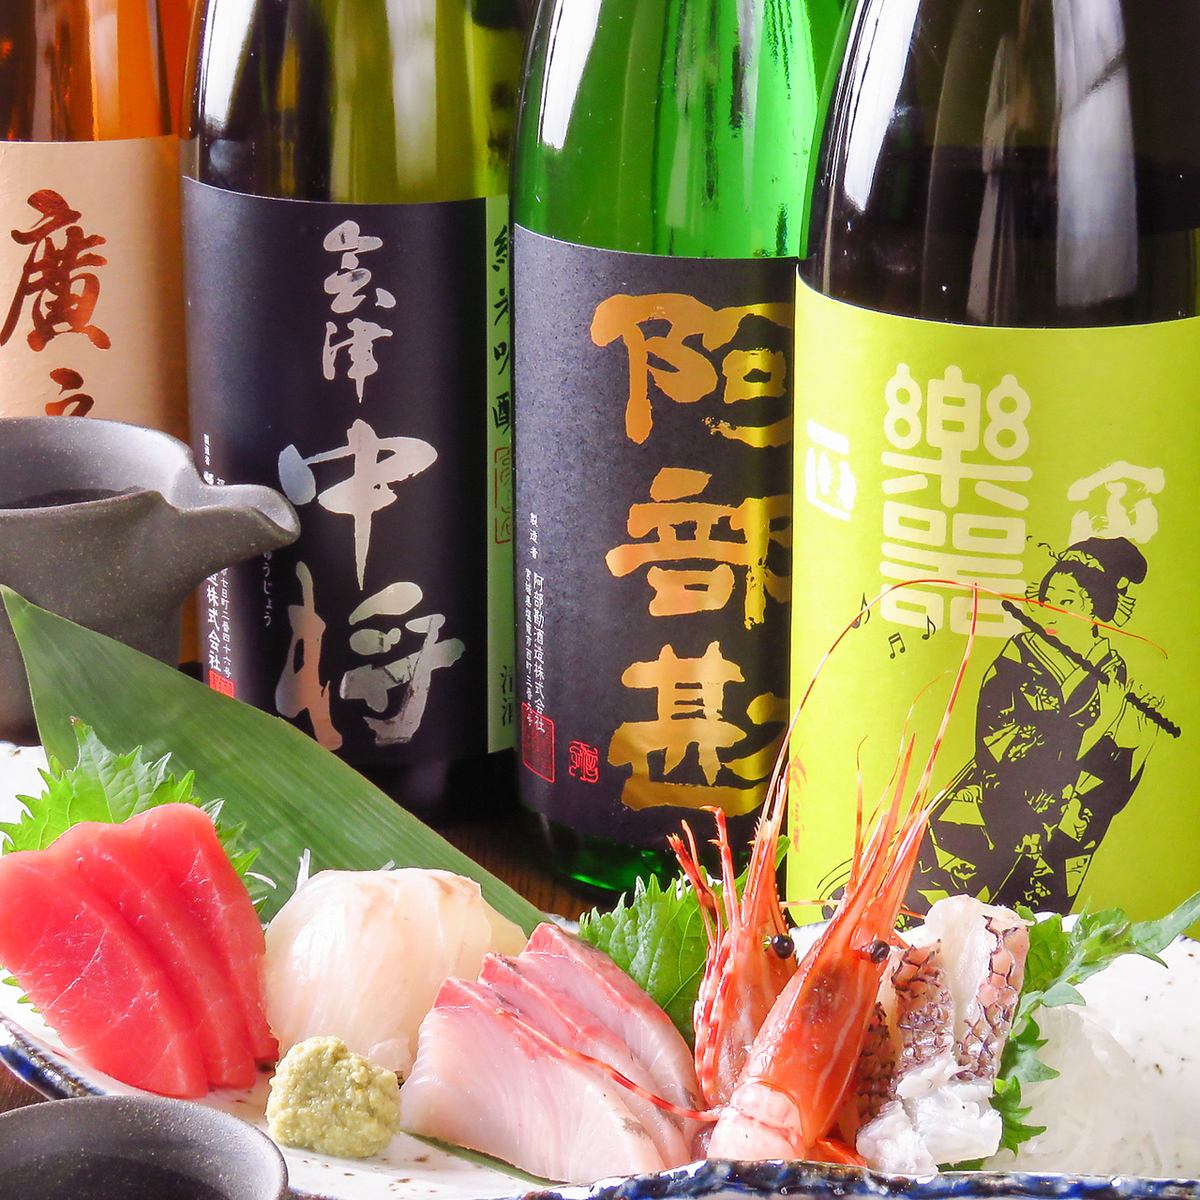 We also offer an all-you-can-drink option that includes local sake.